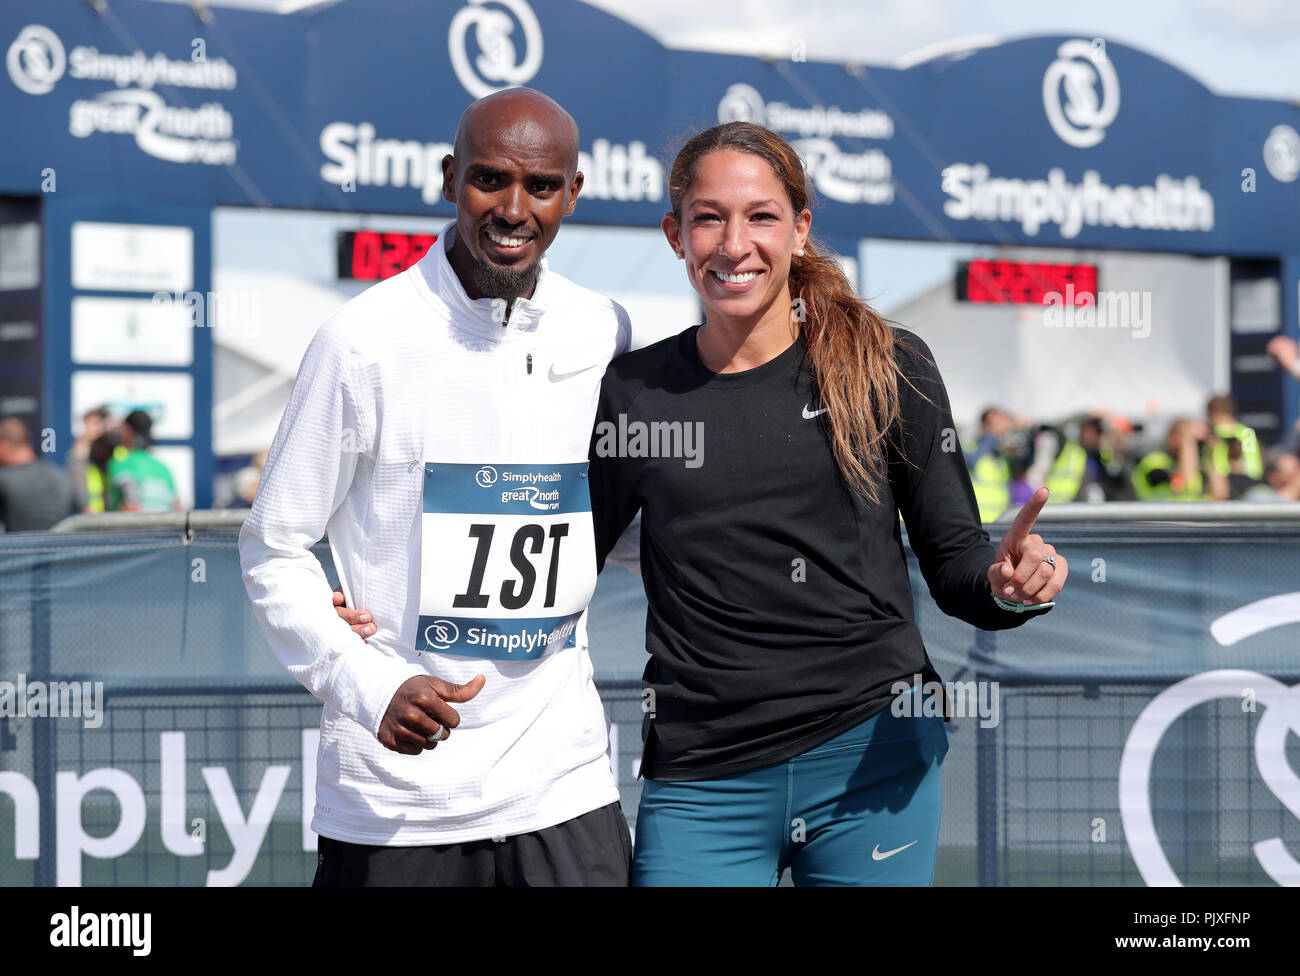 Sir Mo Farah celebrates winning the Men's Elite race along side his wife Tania Nell during the 2018 Simply Health Great North Run. Stock Photo